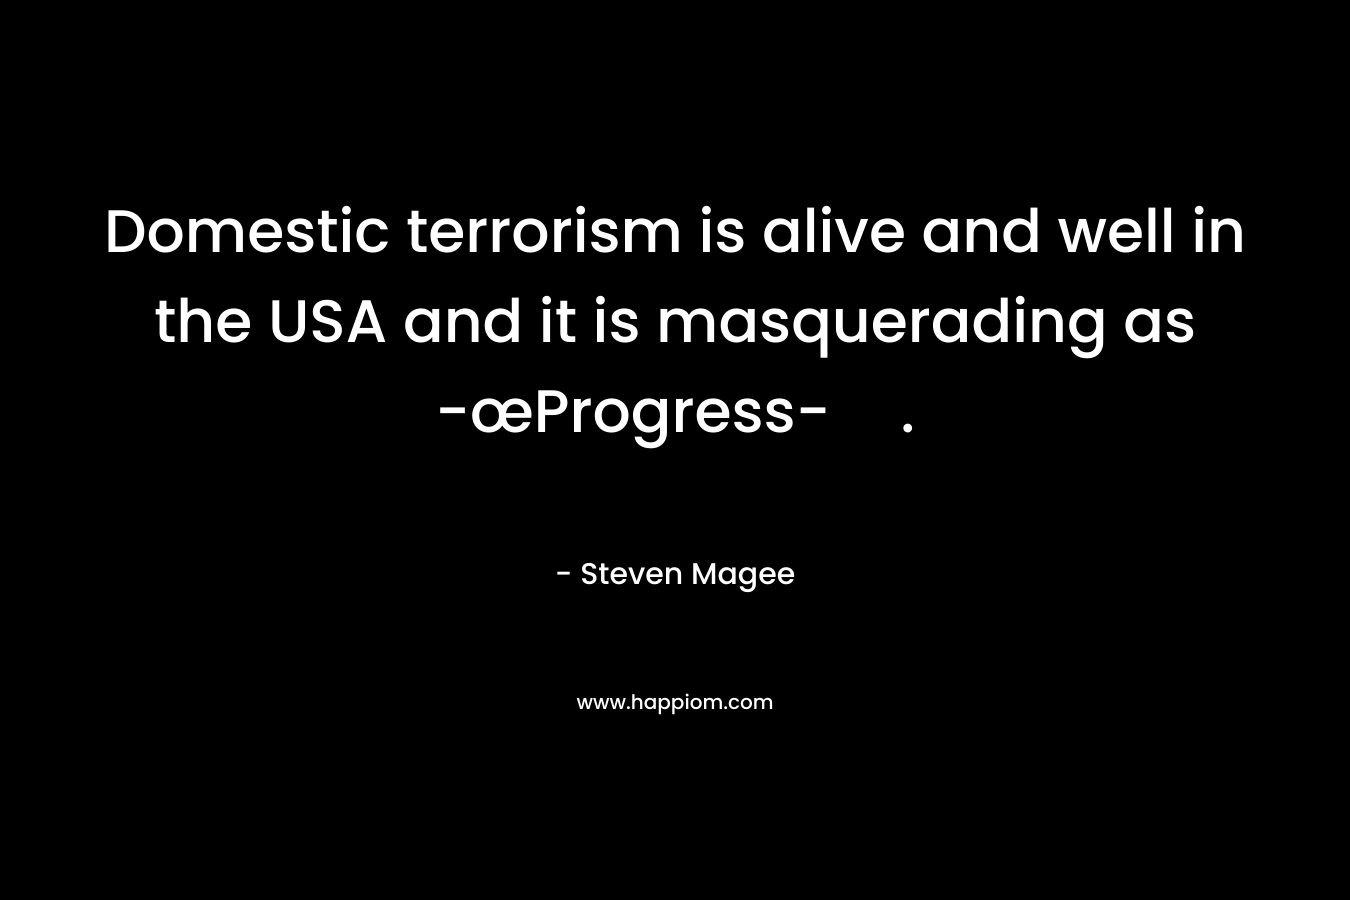 Domestic terrorism is alive and well in the USA and it is masquerading as -œProgress-. – Steven Magee